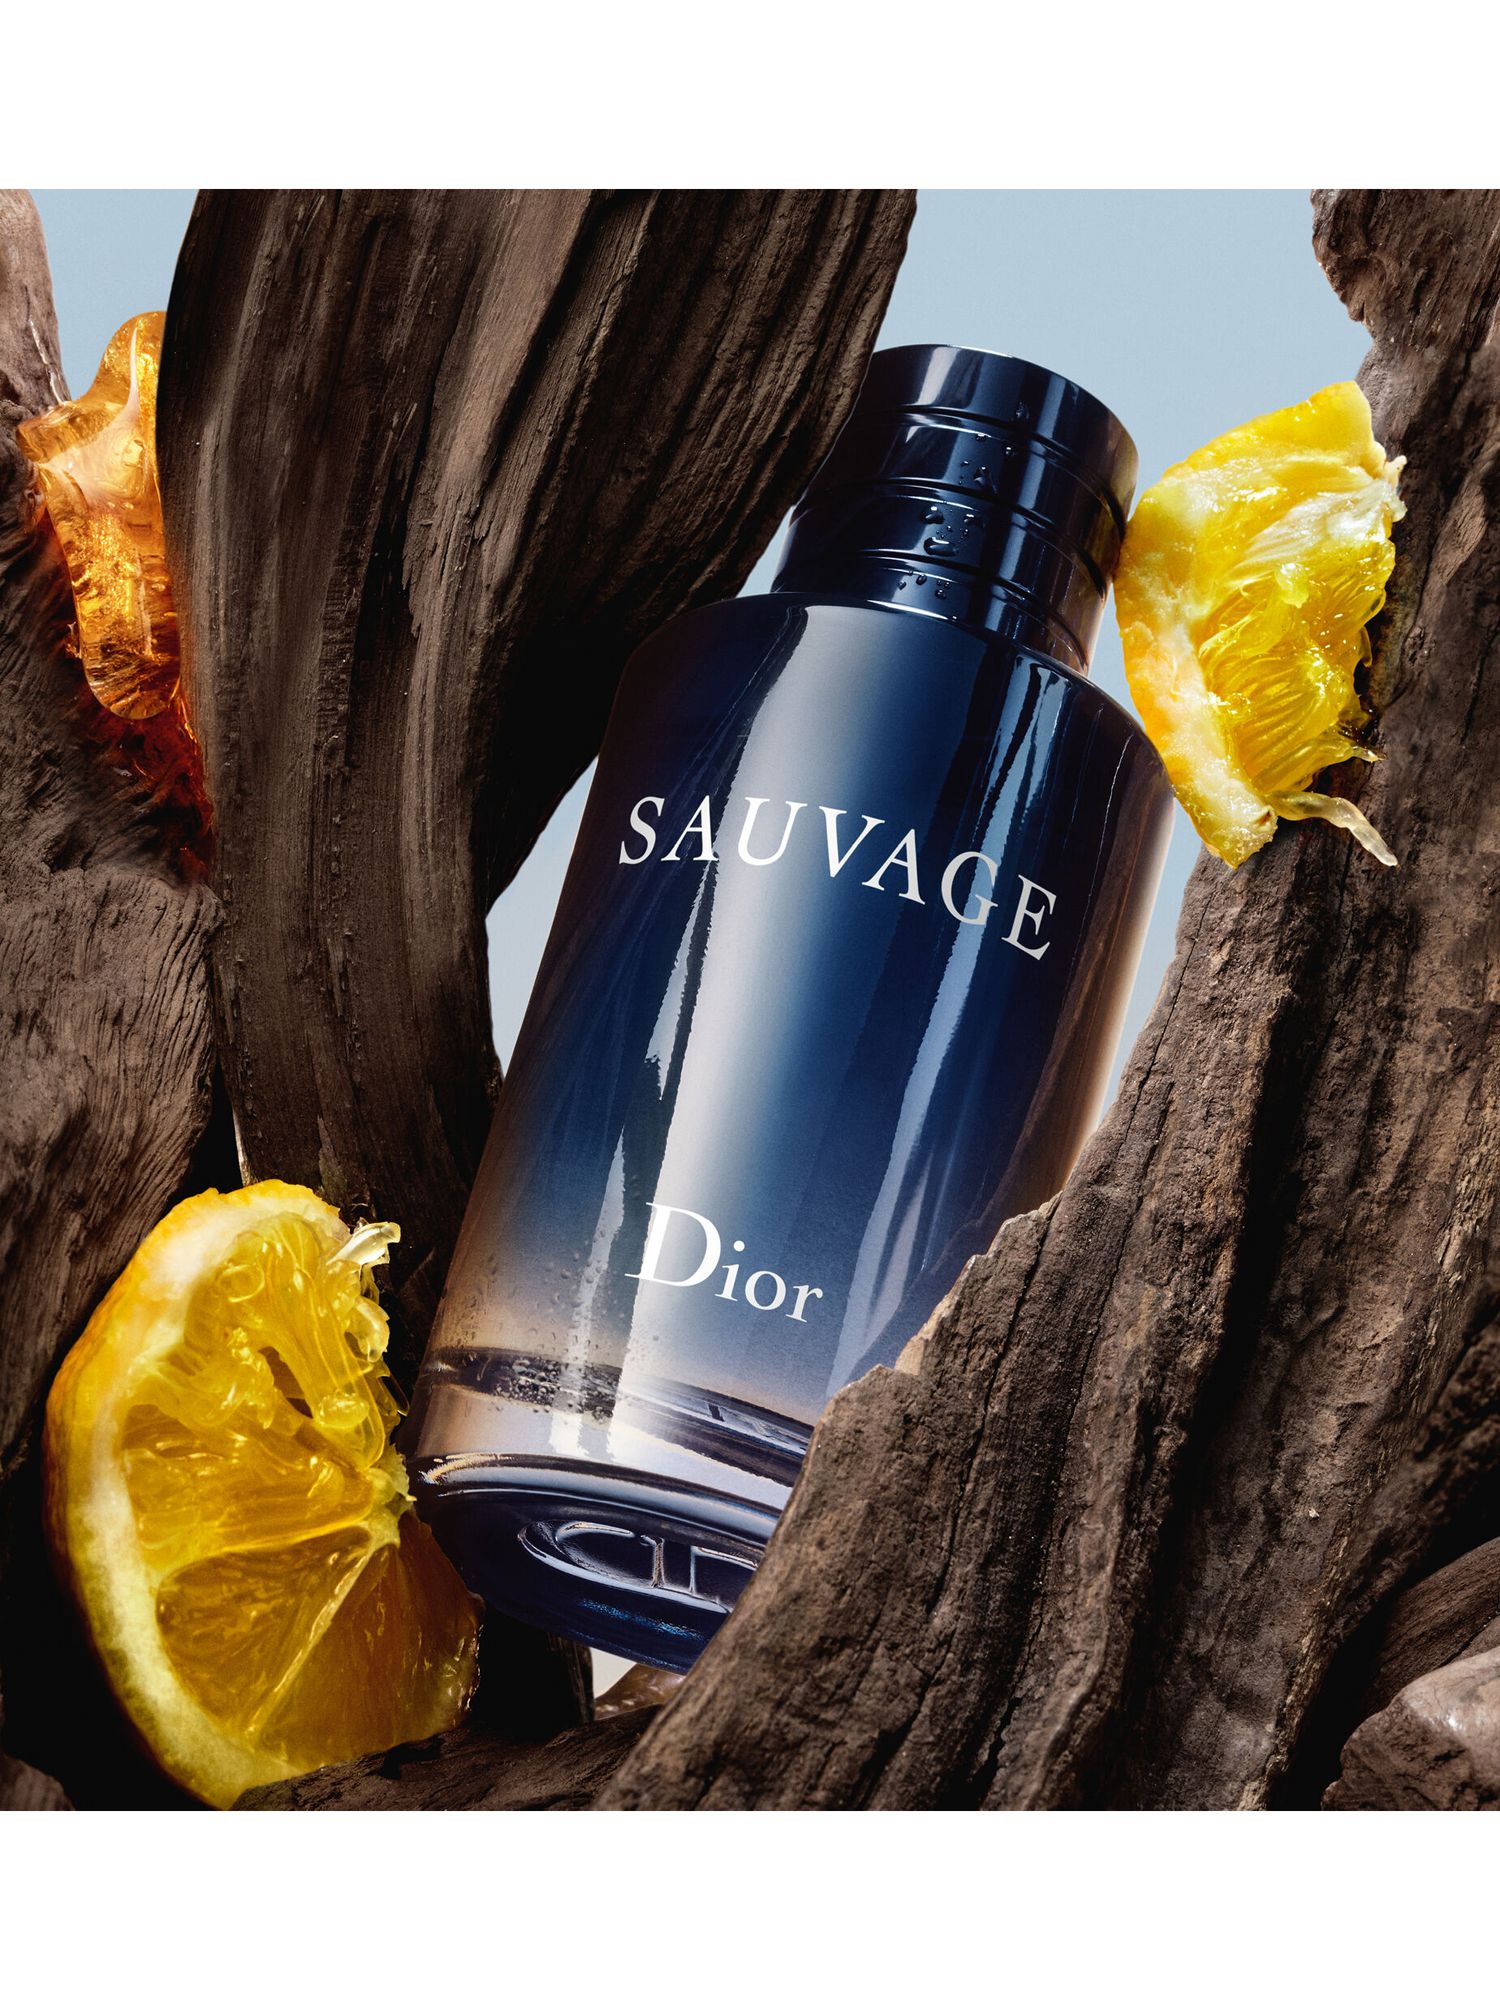 sauvage by dior